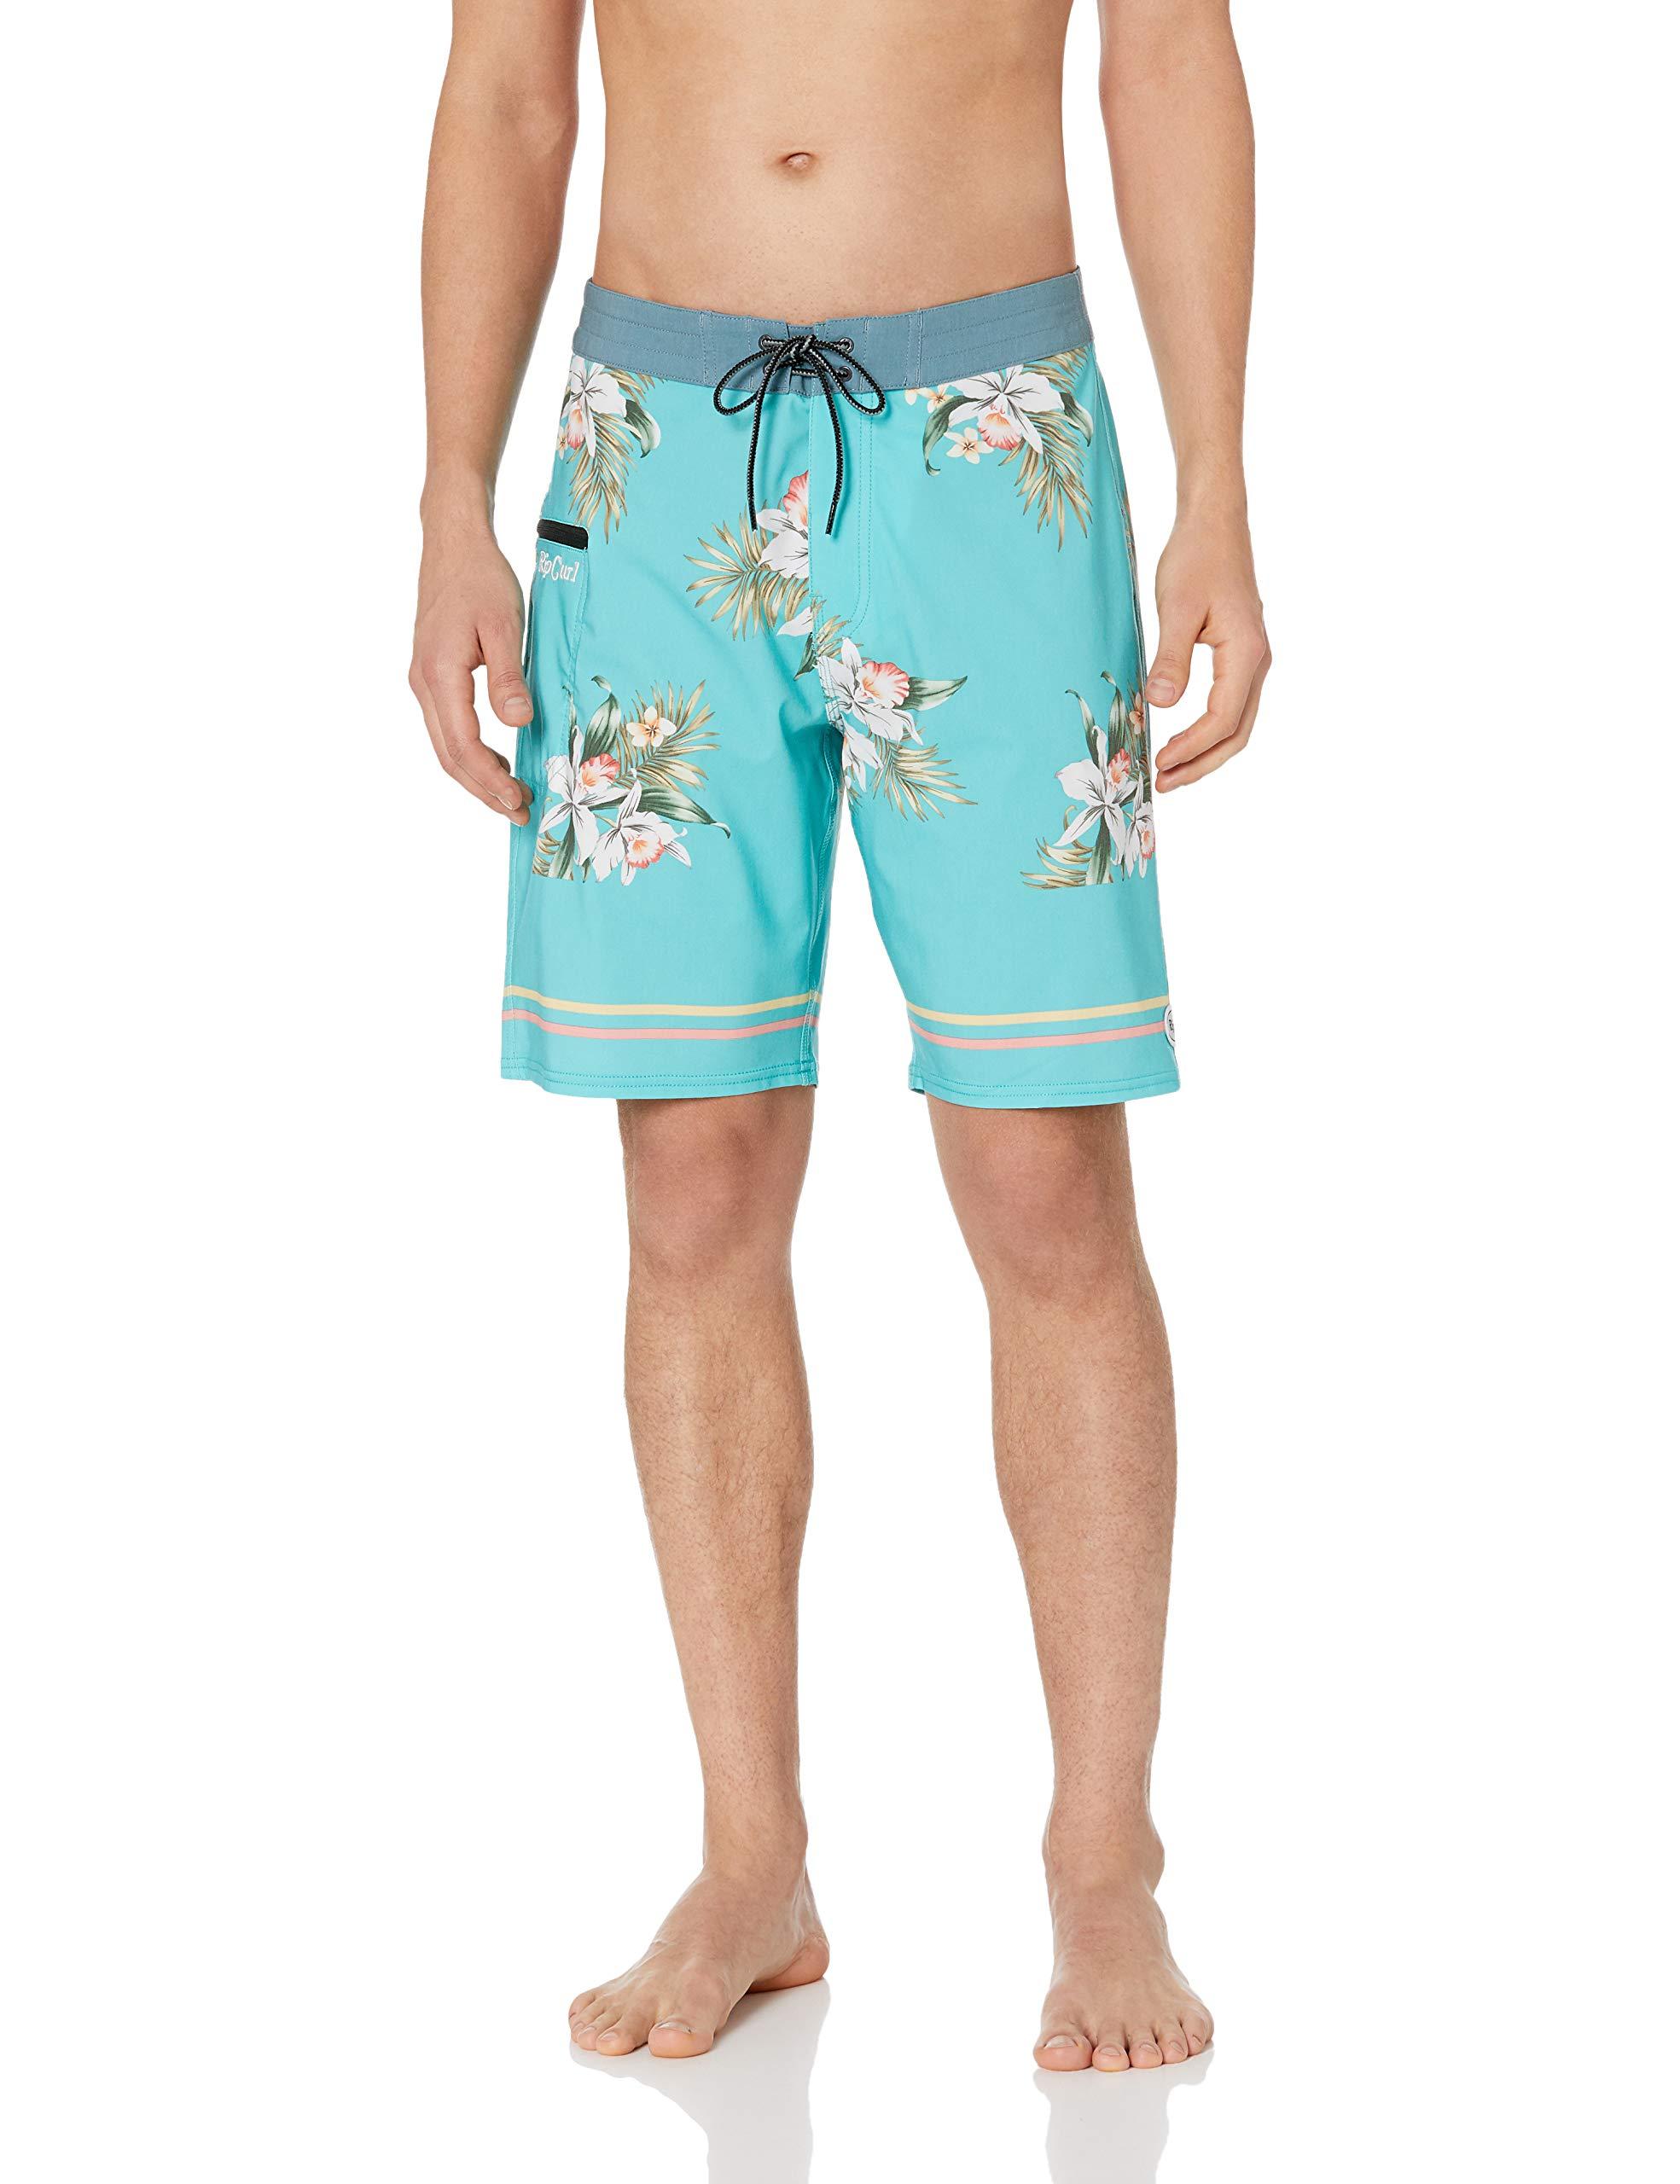 Rip Curl Mirage Atoll Boardshorts in Blue for Men - Save 4% - Lyst